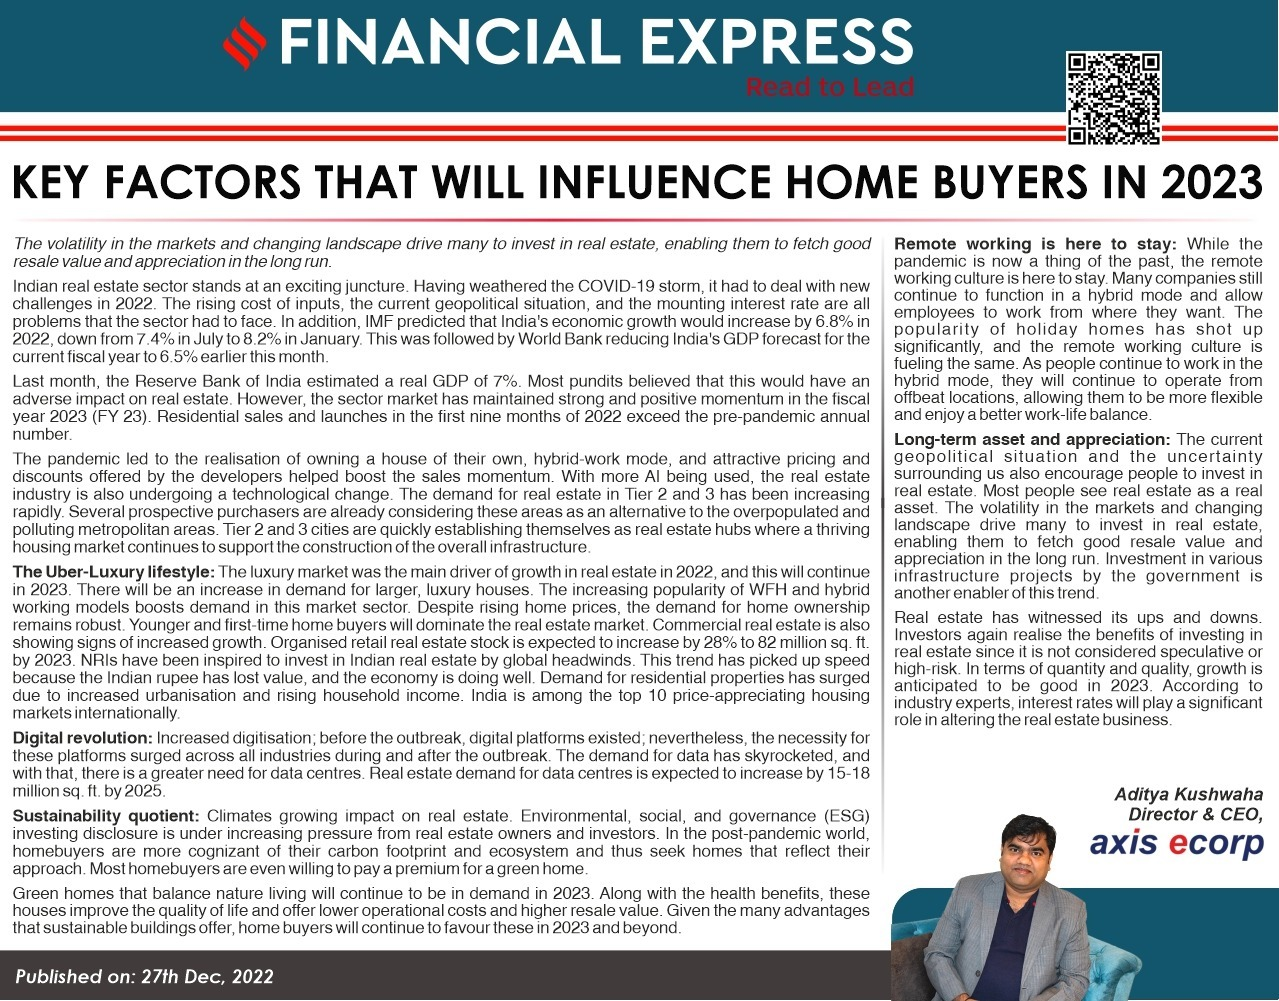 Key factors that will influence home buyers in 2023